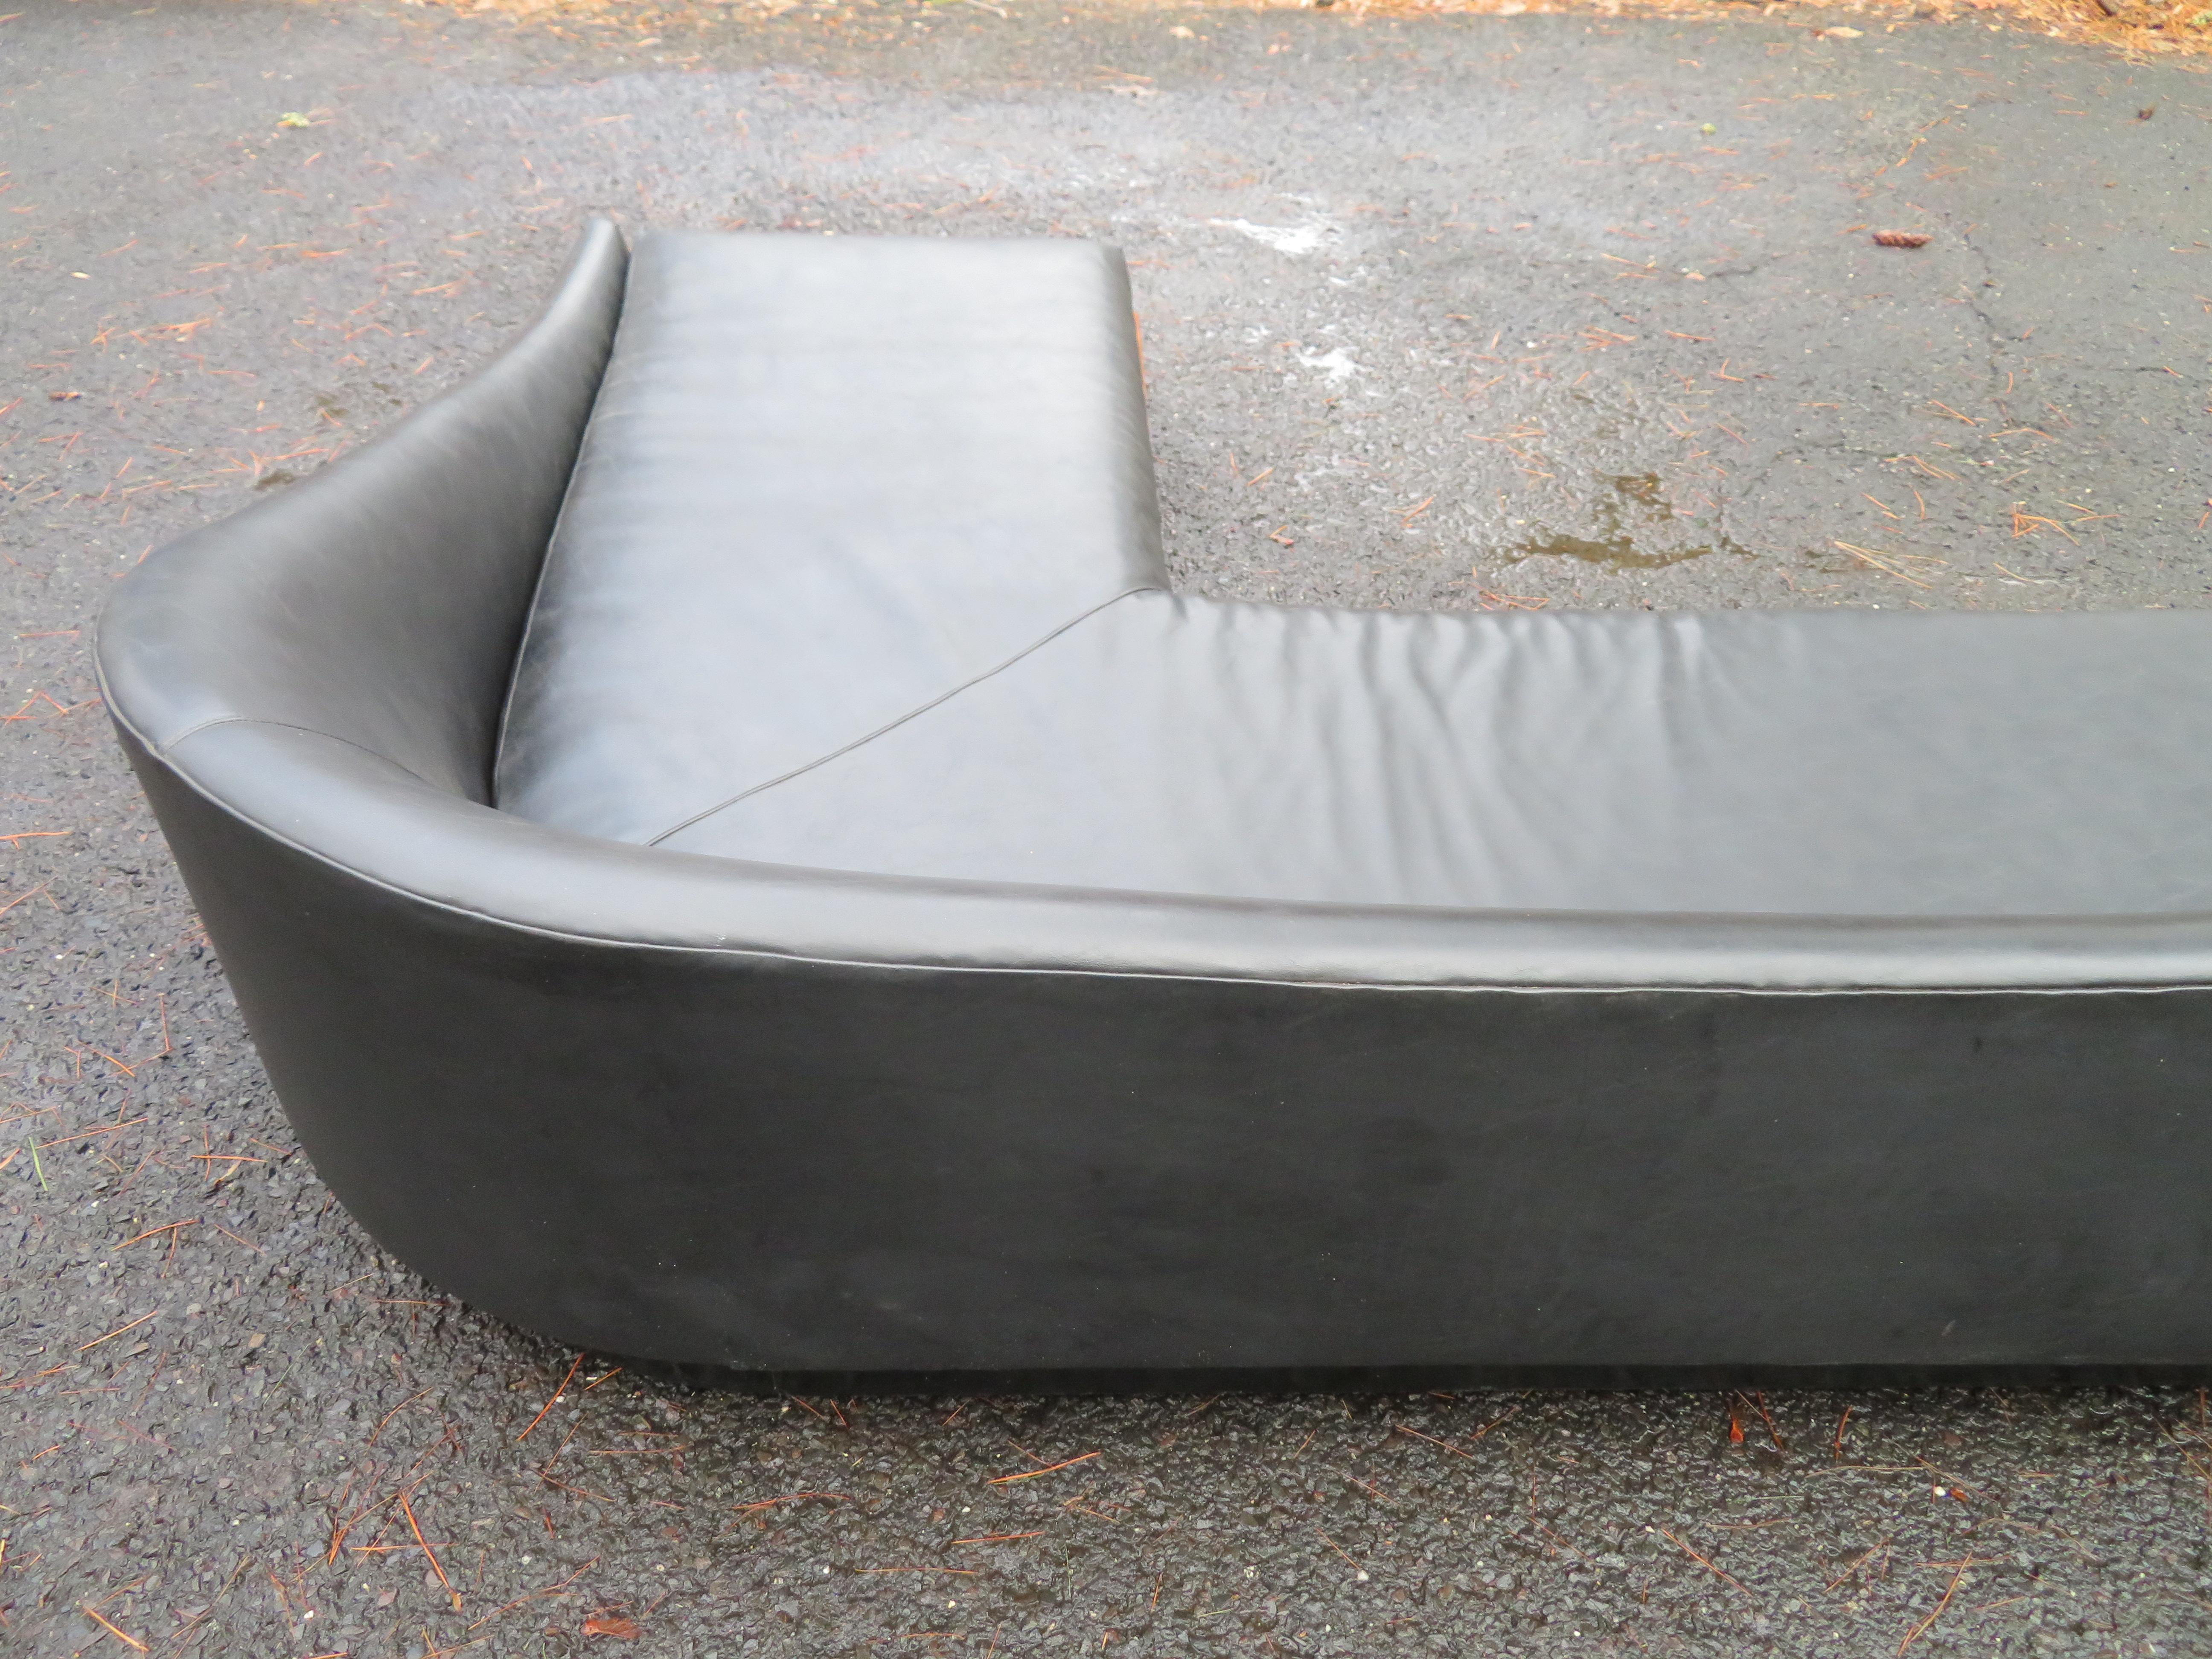 Faux Leather Outstanding Adrian Pearsall Boom-a-range Cloud Sofa Craft Associates Mid-Century For Sale